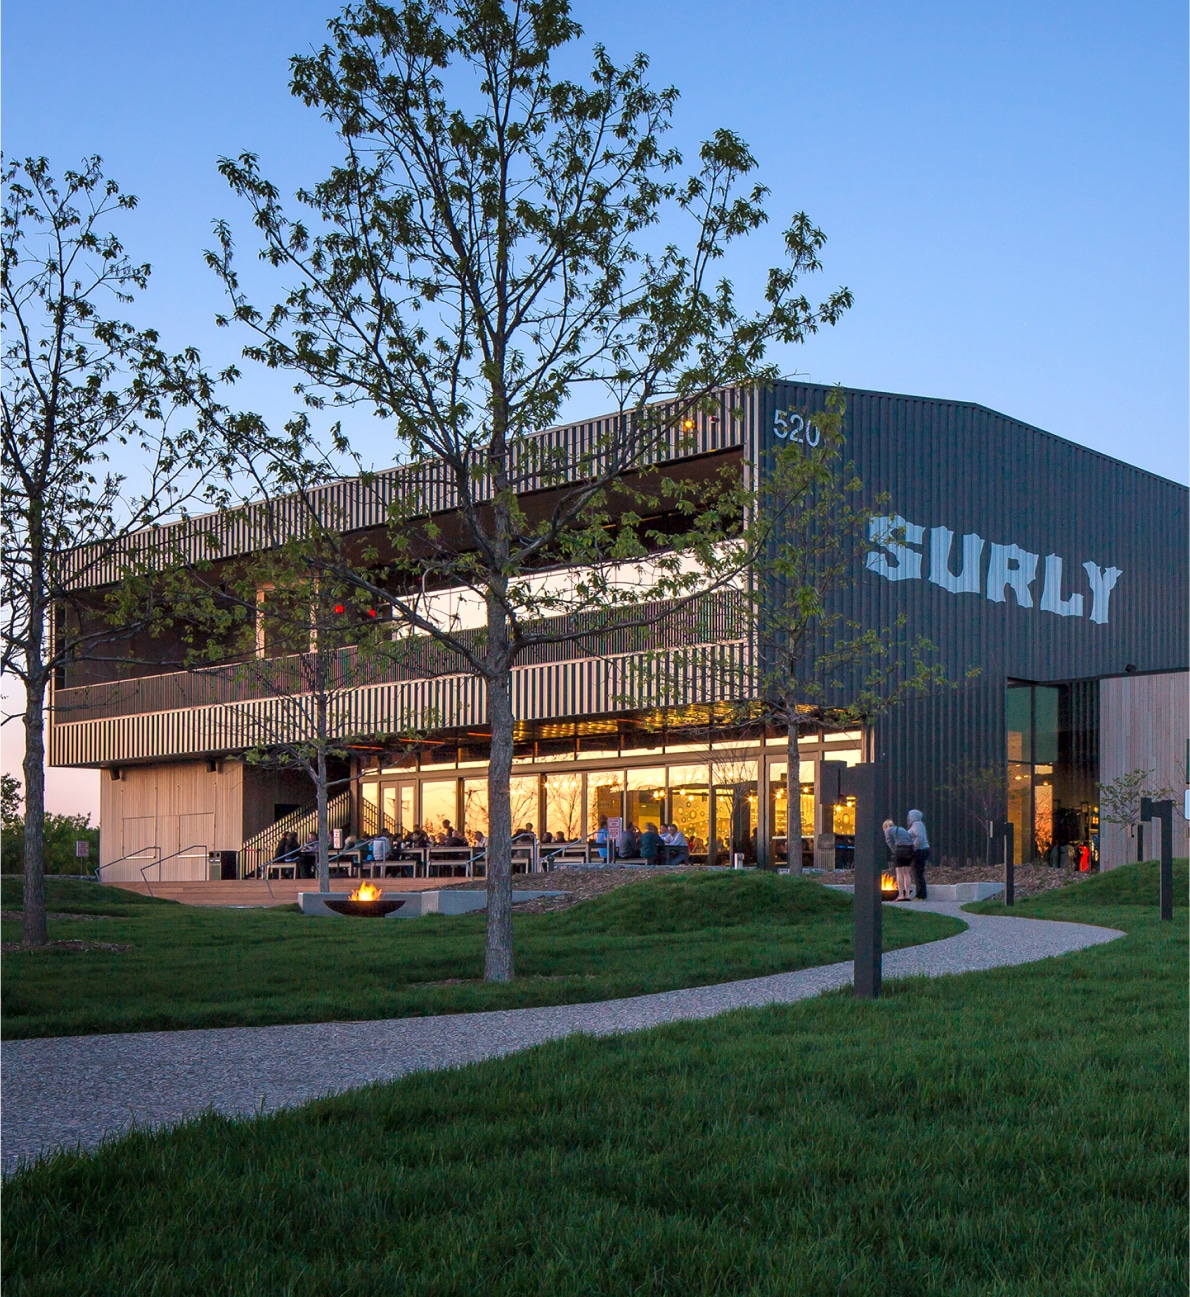 Exterior image of Surly Destination Brewery, built by McGough